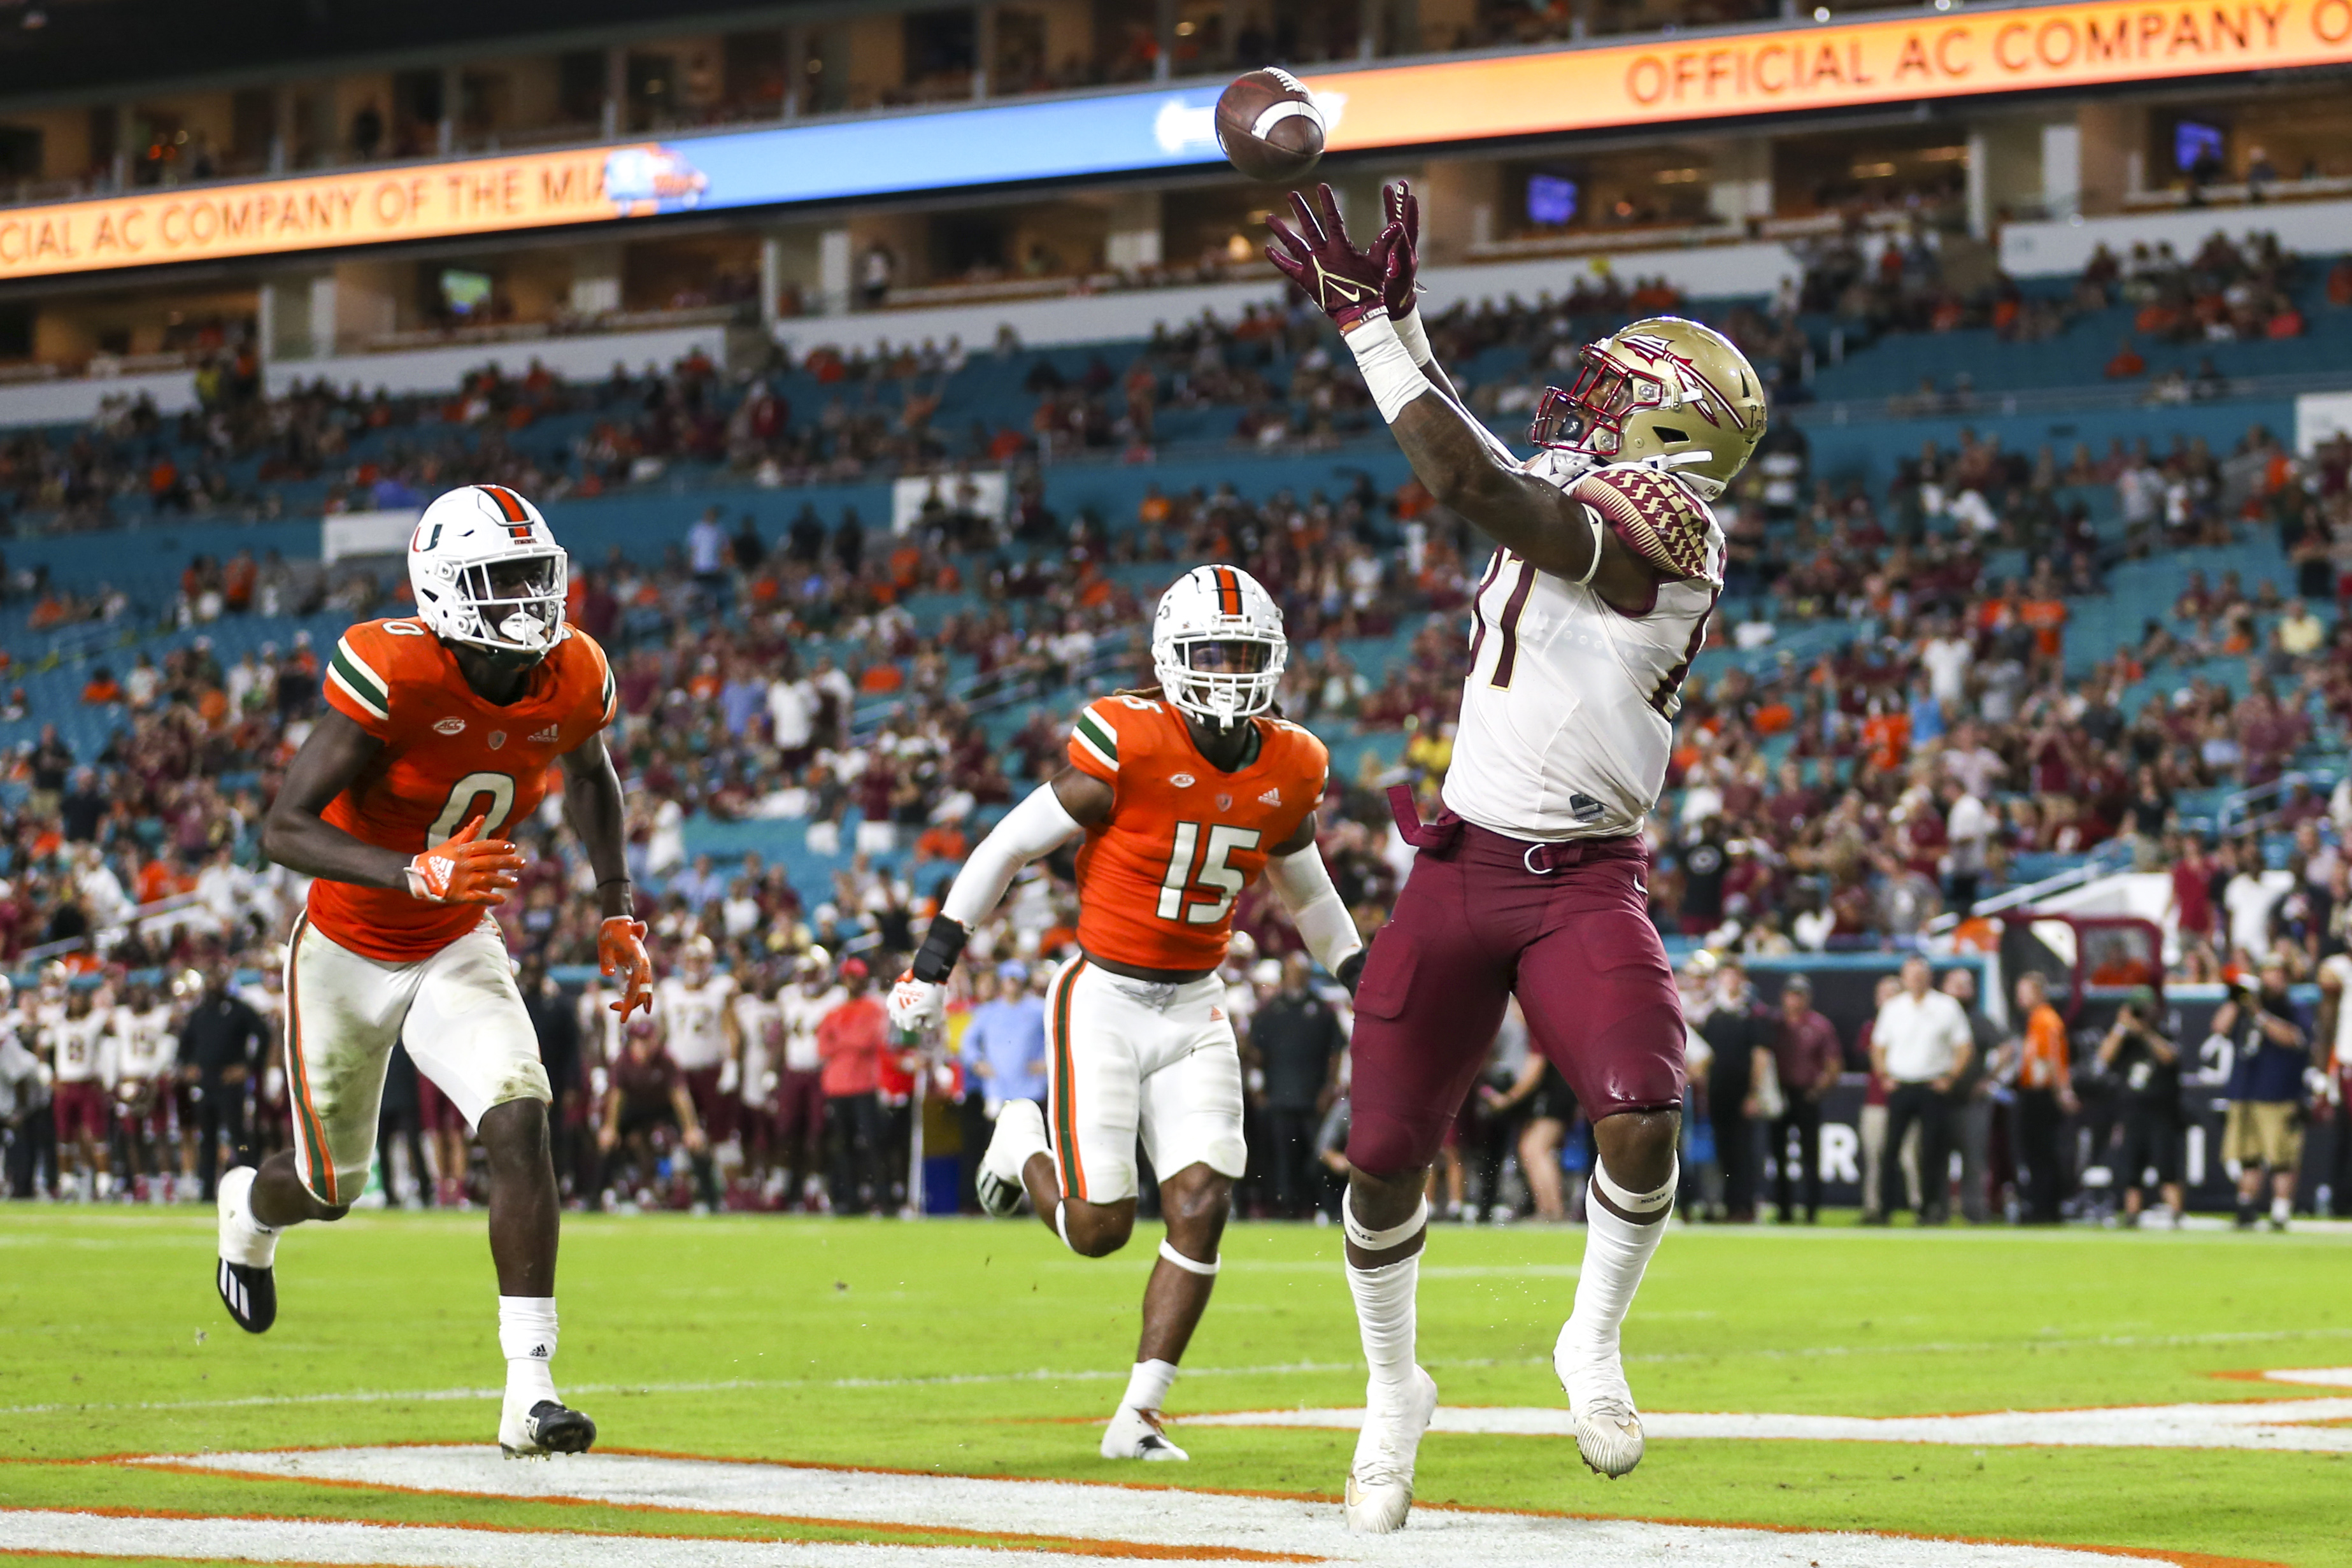 Florida State opens as slight favorite in road matchup against Syracuse